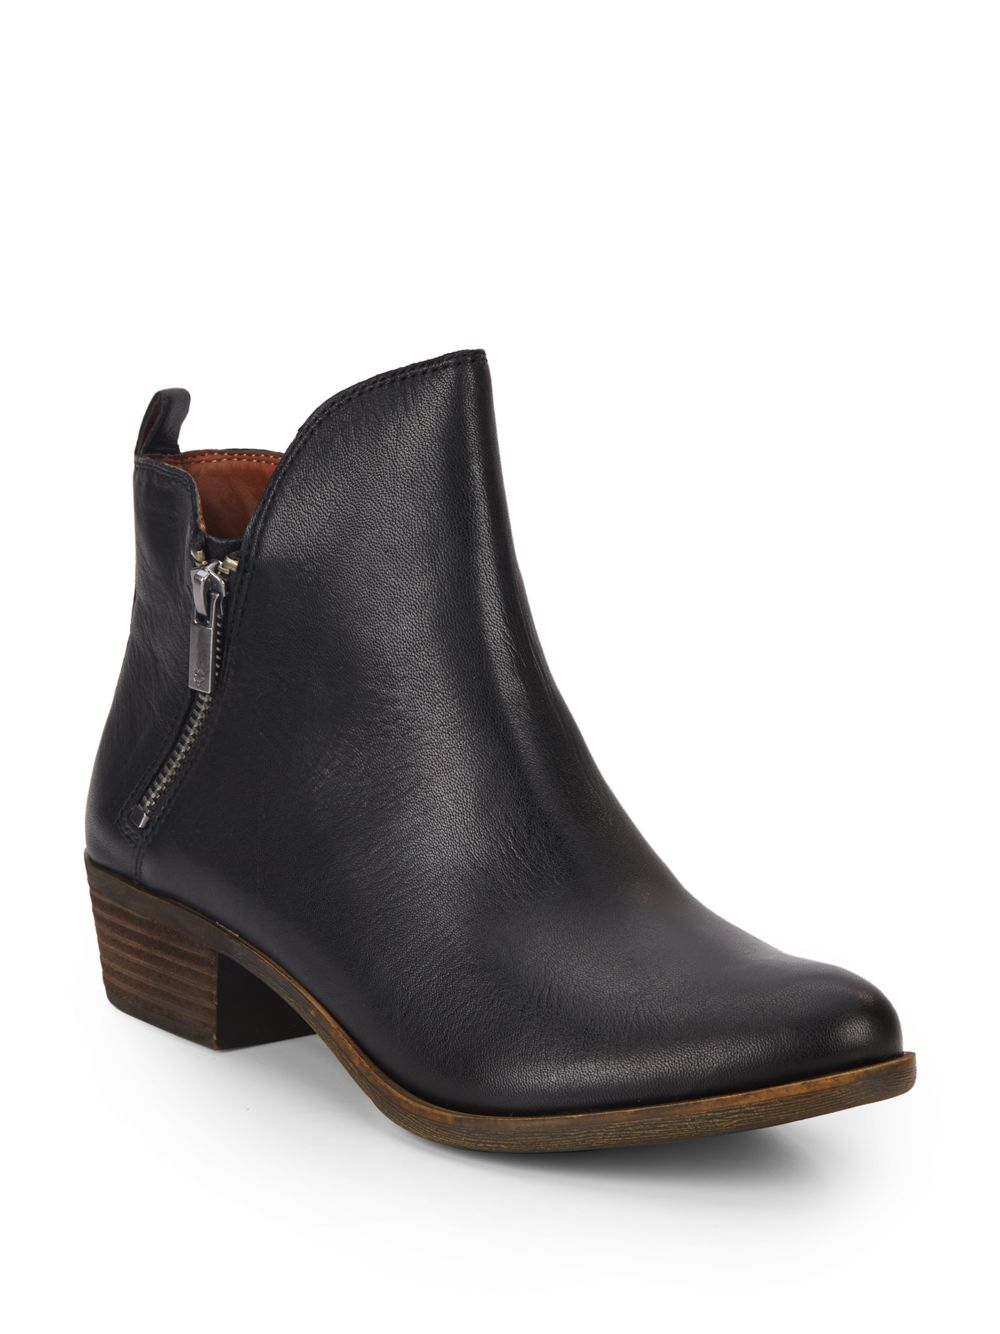 Lucky brand Basonta Leather Ankle Boots in Black - Save 43% | Lyst